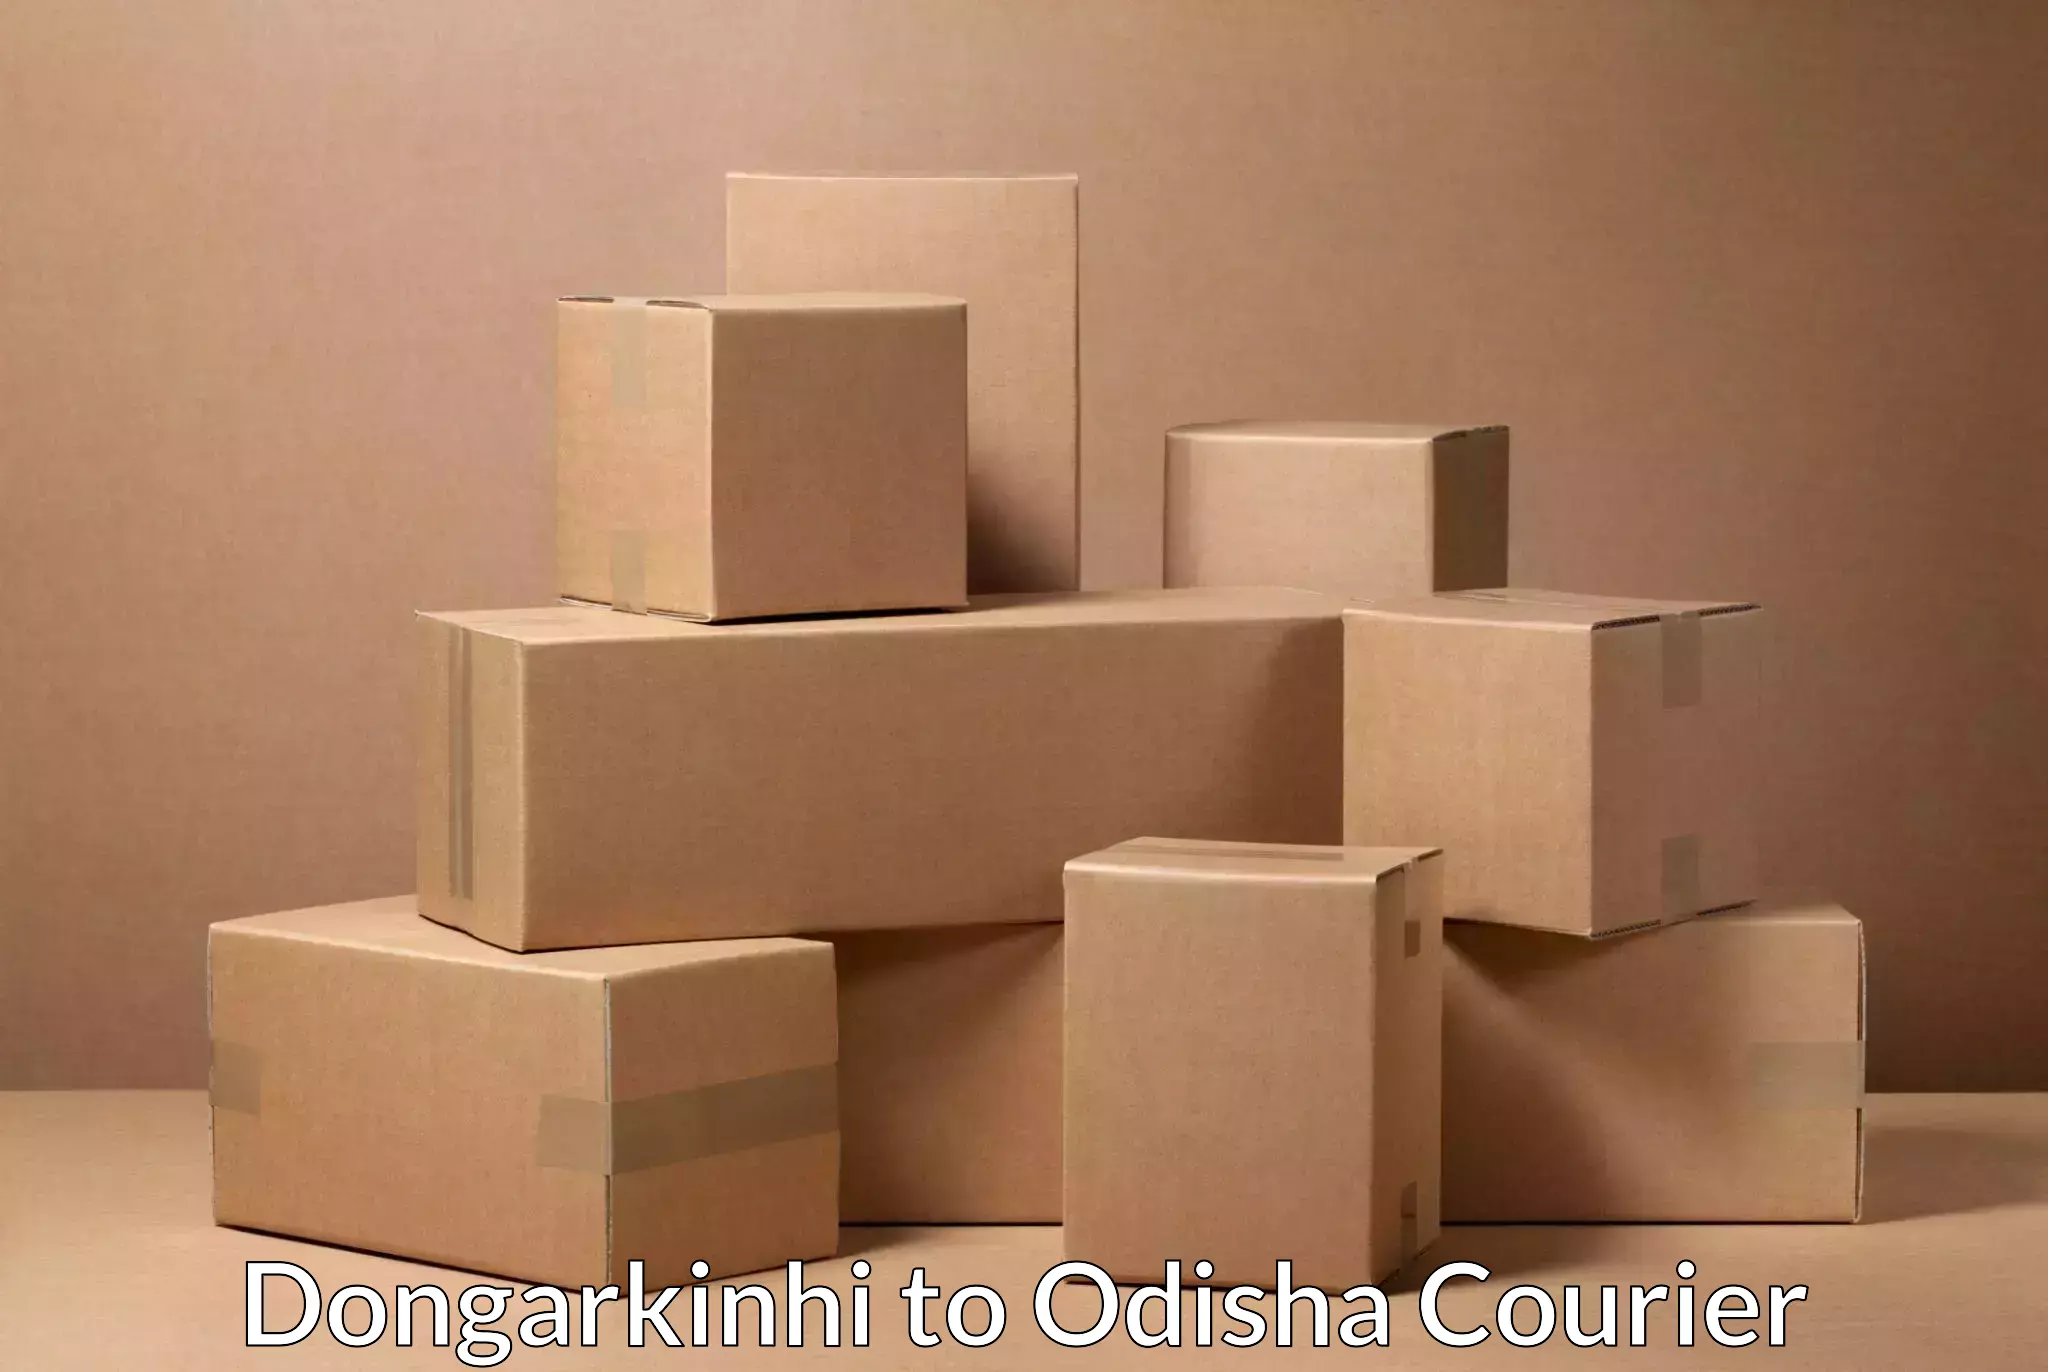 Large package courier in Dongarkinhi to Jeypore